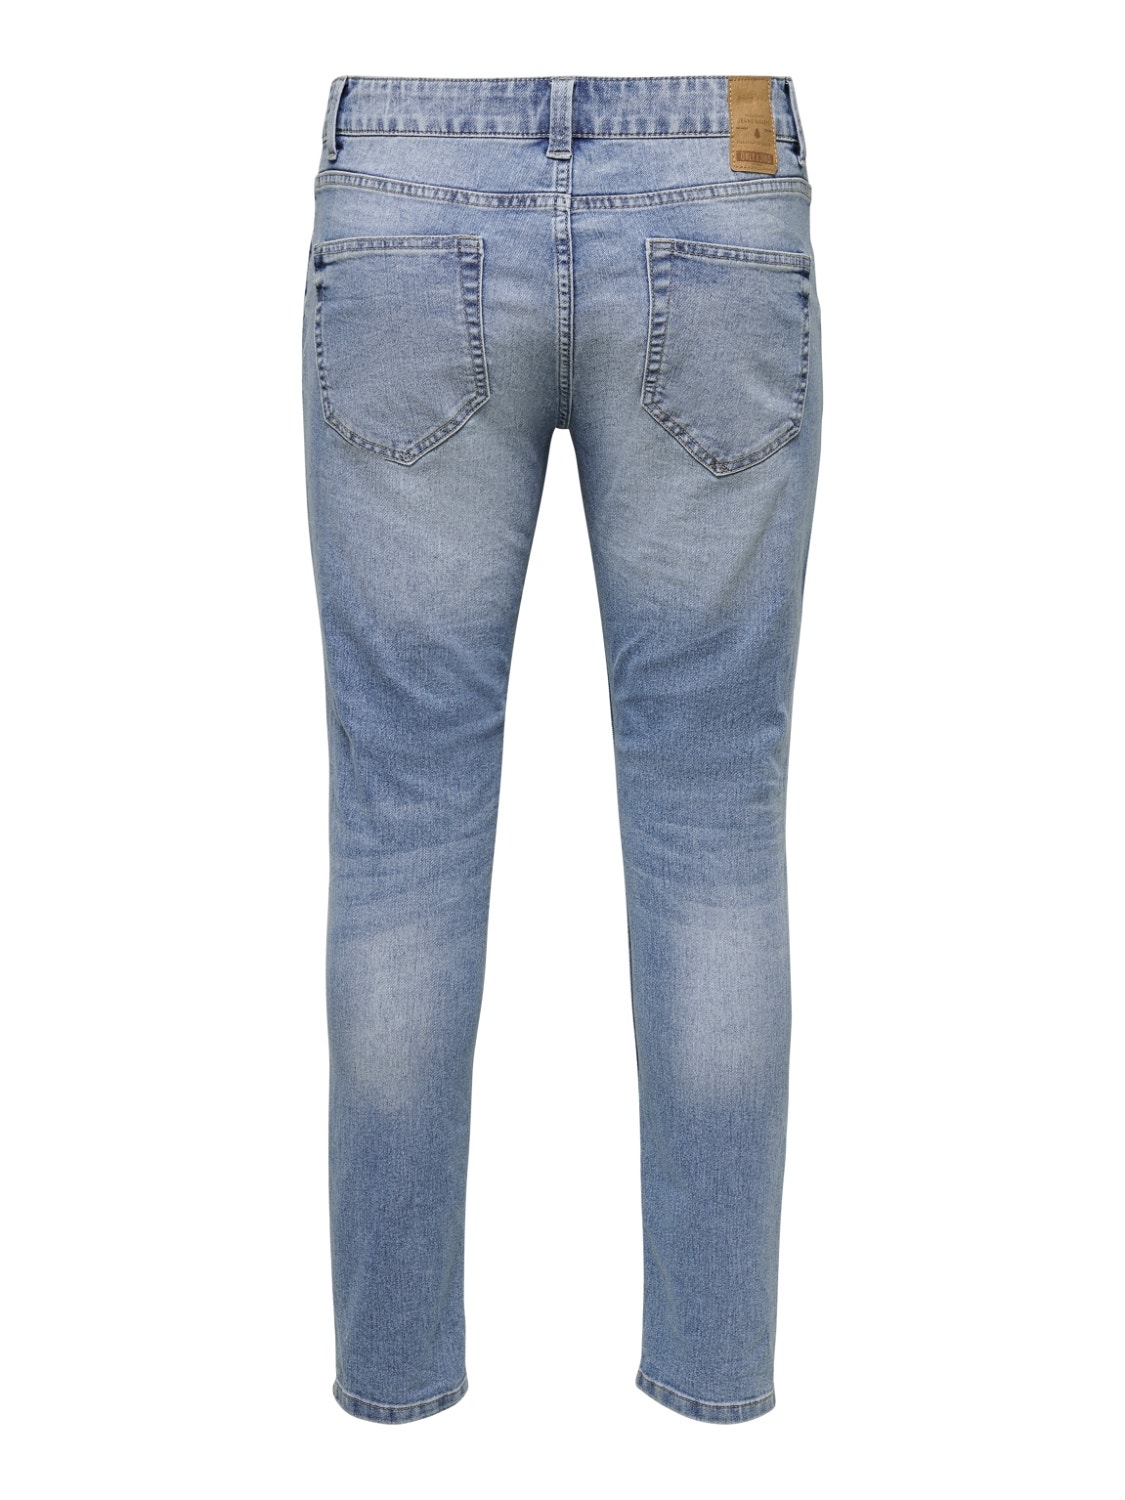 ONLY & SONS Jeans Skinny Fit Taille classique -Blue Denim - 22015149